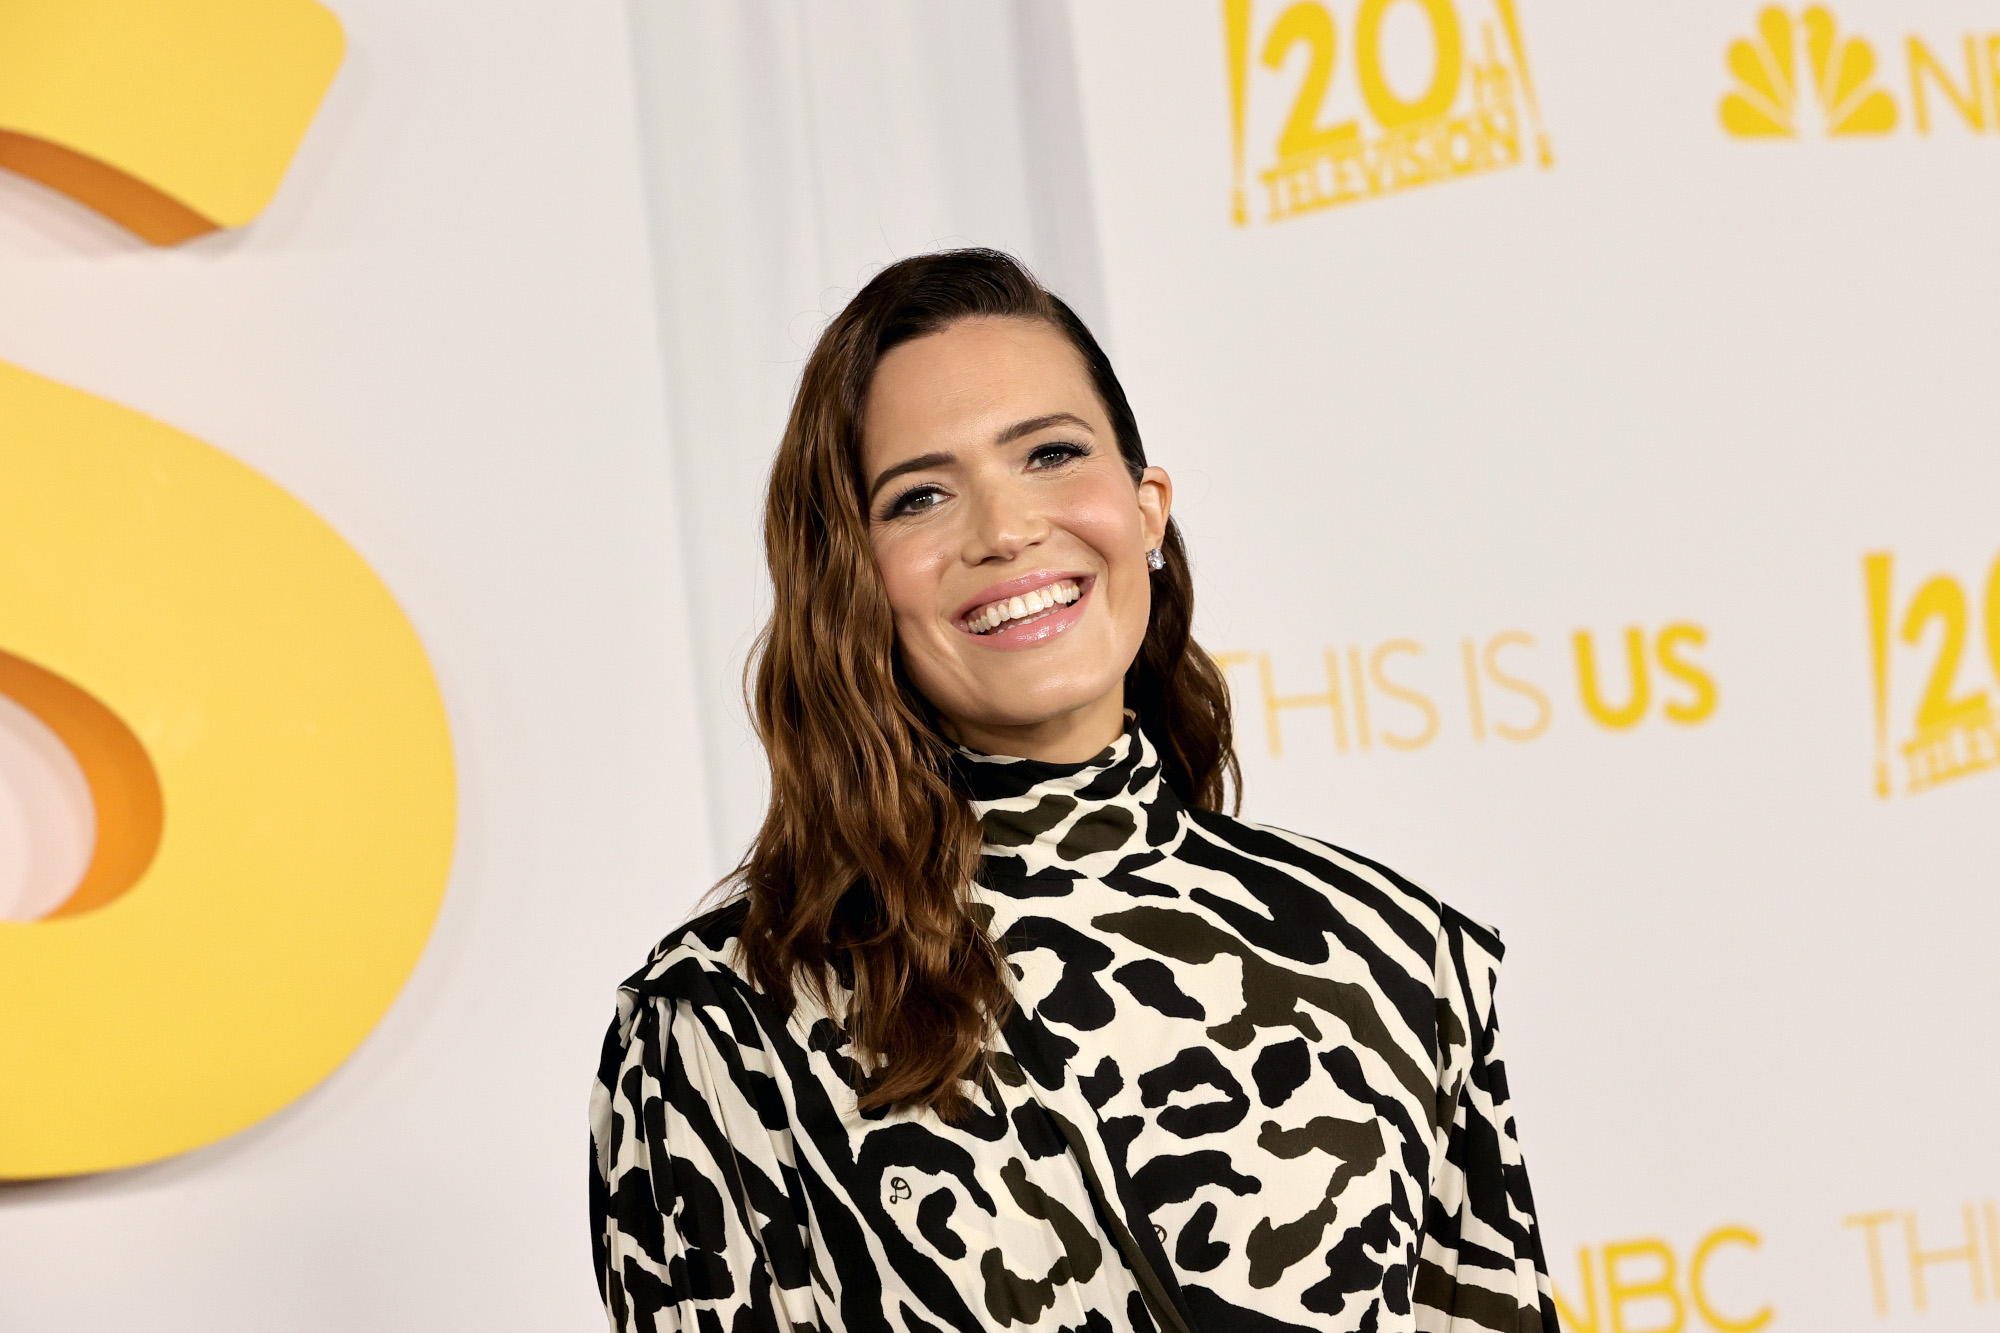 'This Is Us' star Mandy Moore, who plays Rebecca Pearson on the show. She's wearing a white dress with black leopard-spot-like patterns on it. She's smiling and standing in front of a wall with 'This Is Us' written on it.